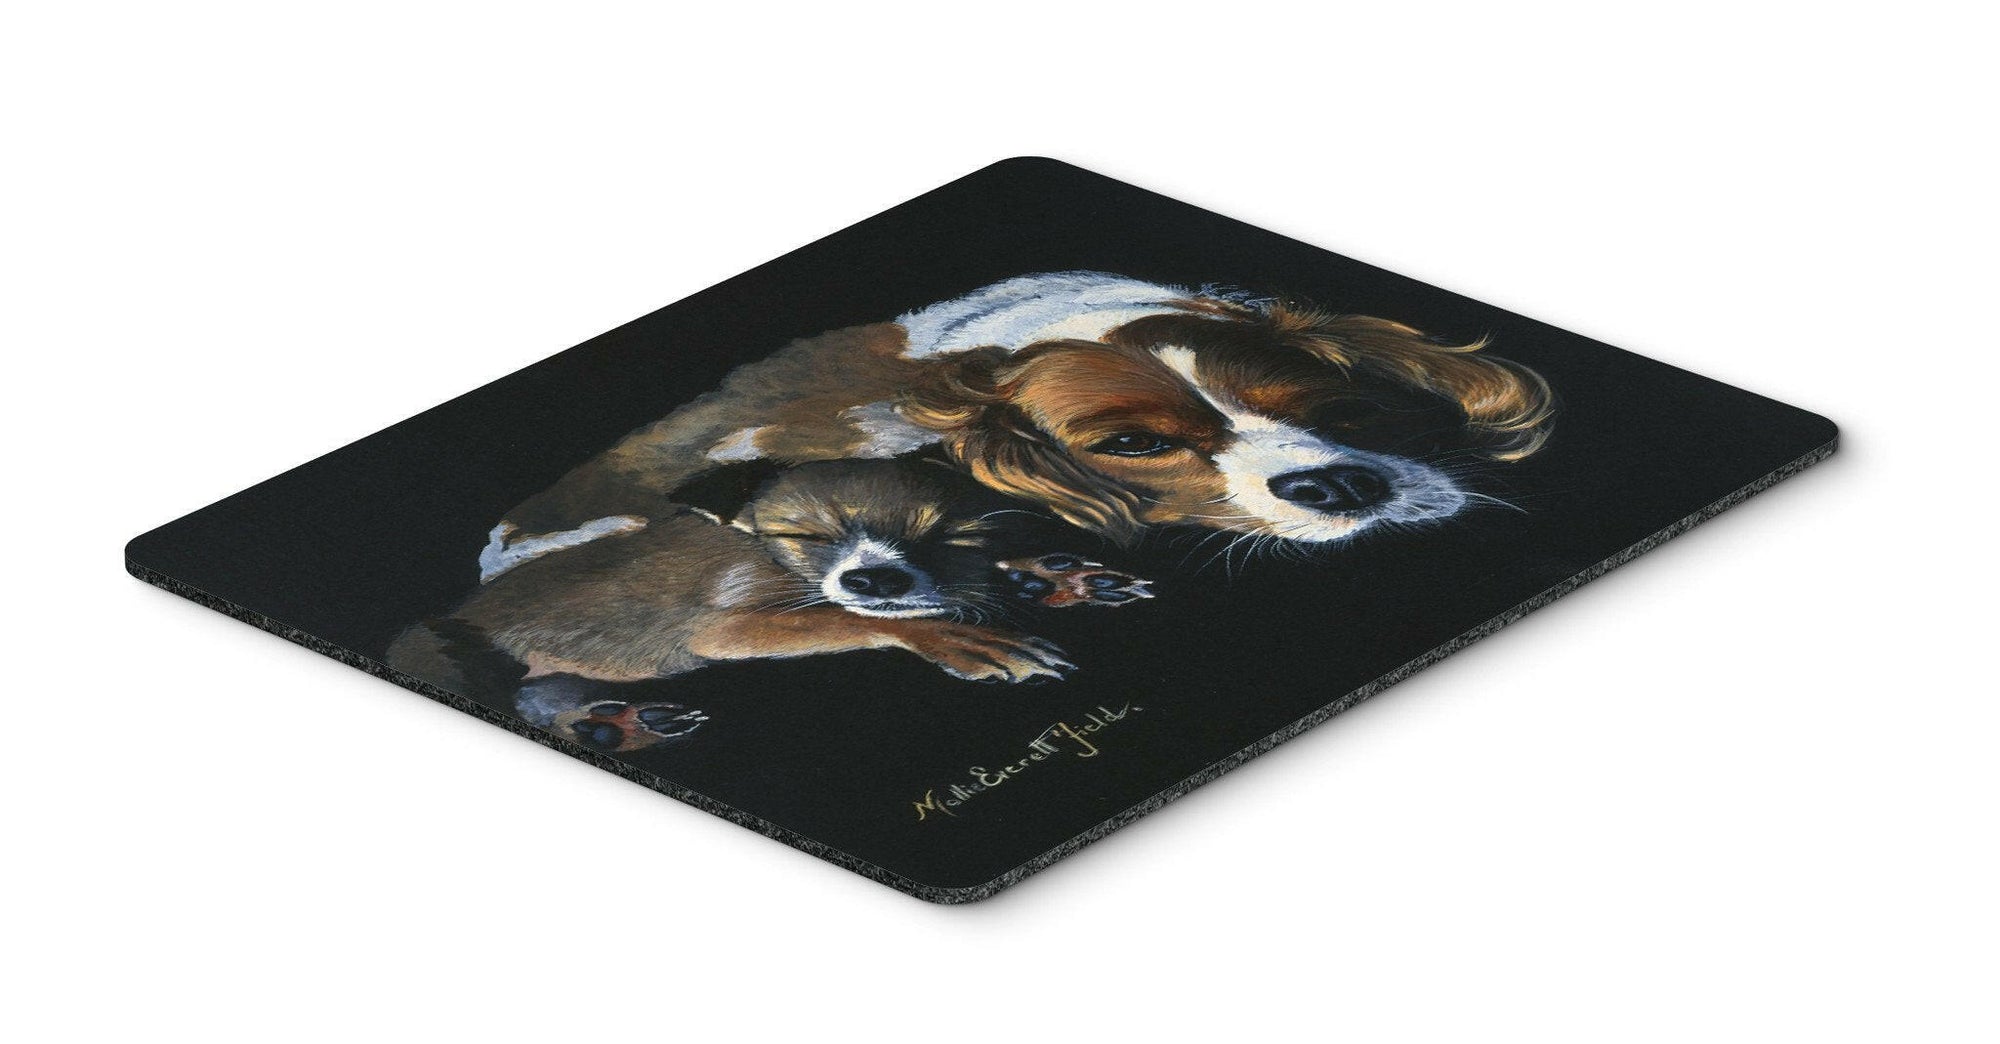 Cozy Pals with Cavalier Spaniel Mouse Pad, Hot Pad or Trivet FMF0022MP by Caroline's Treasures